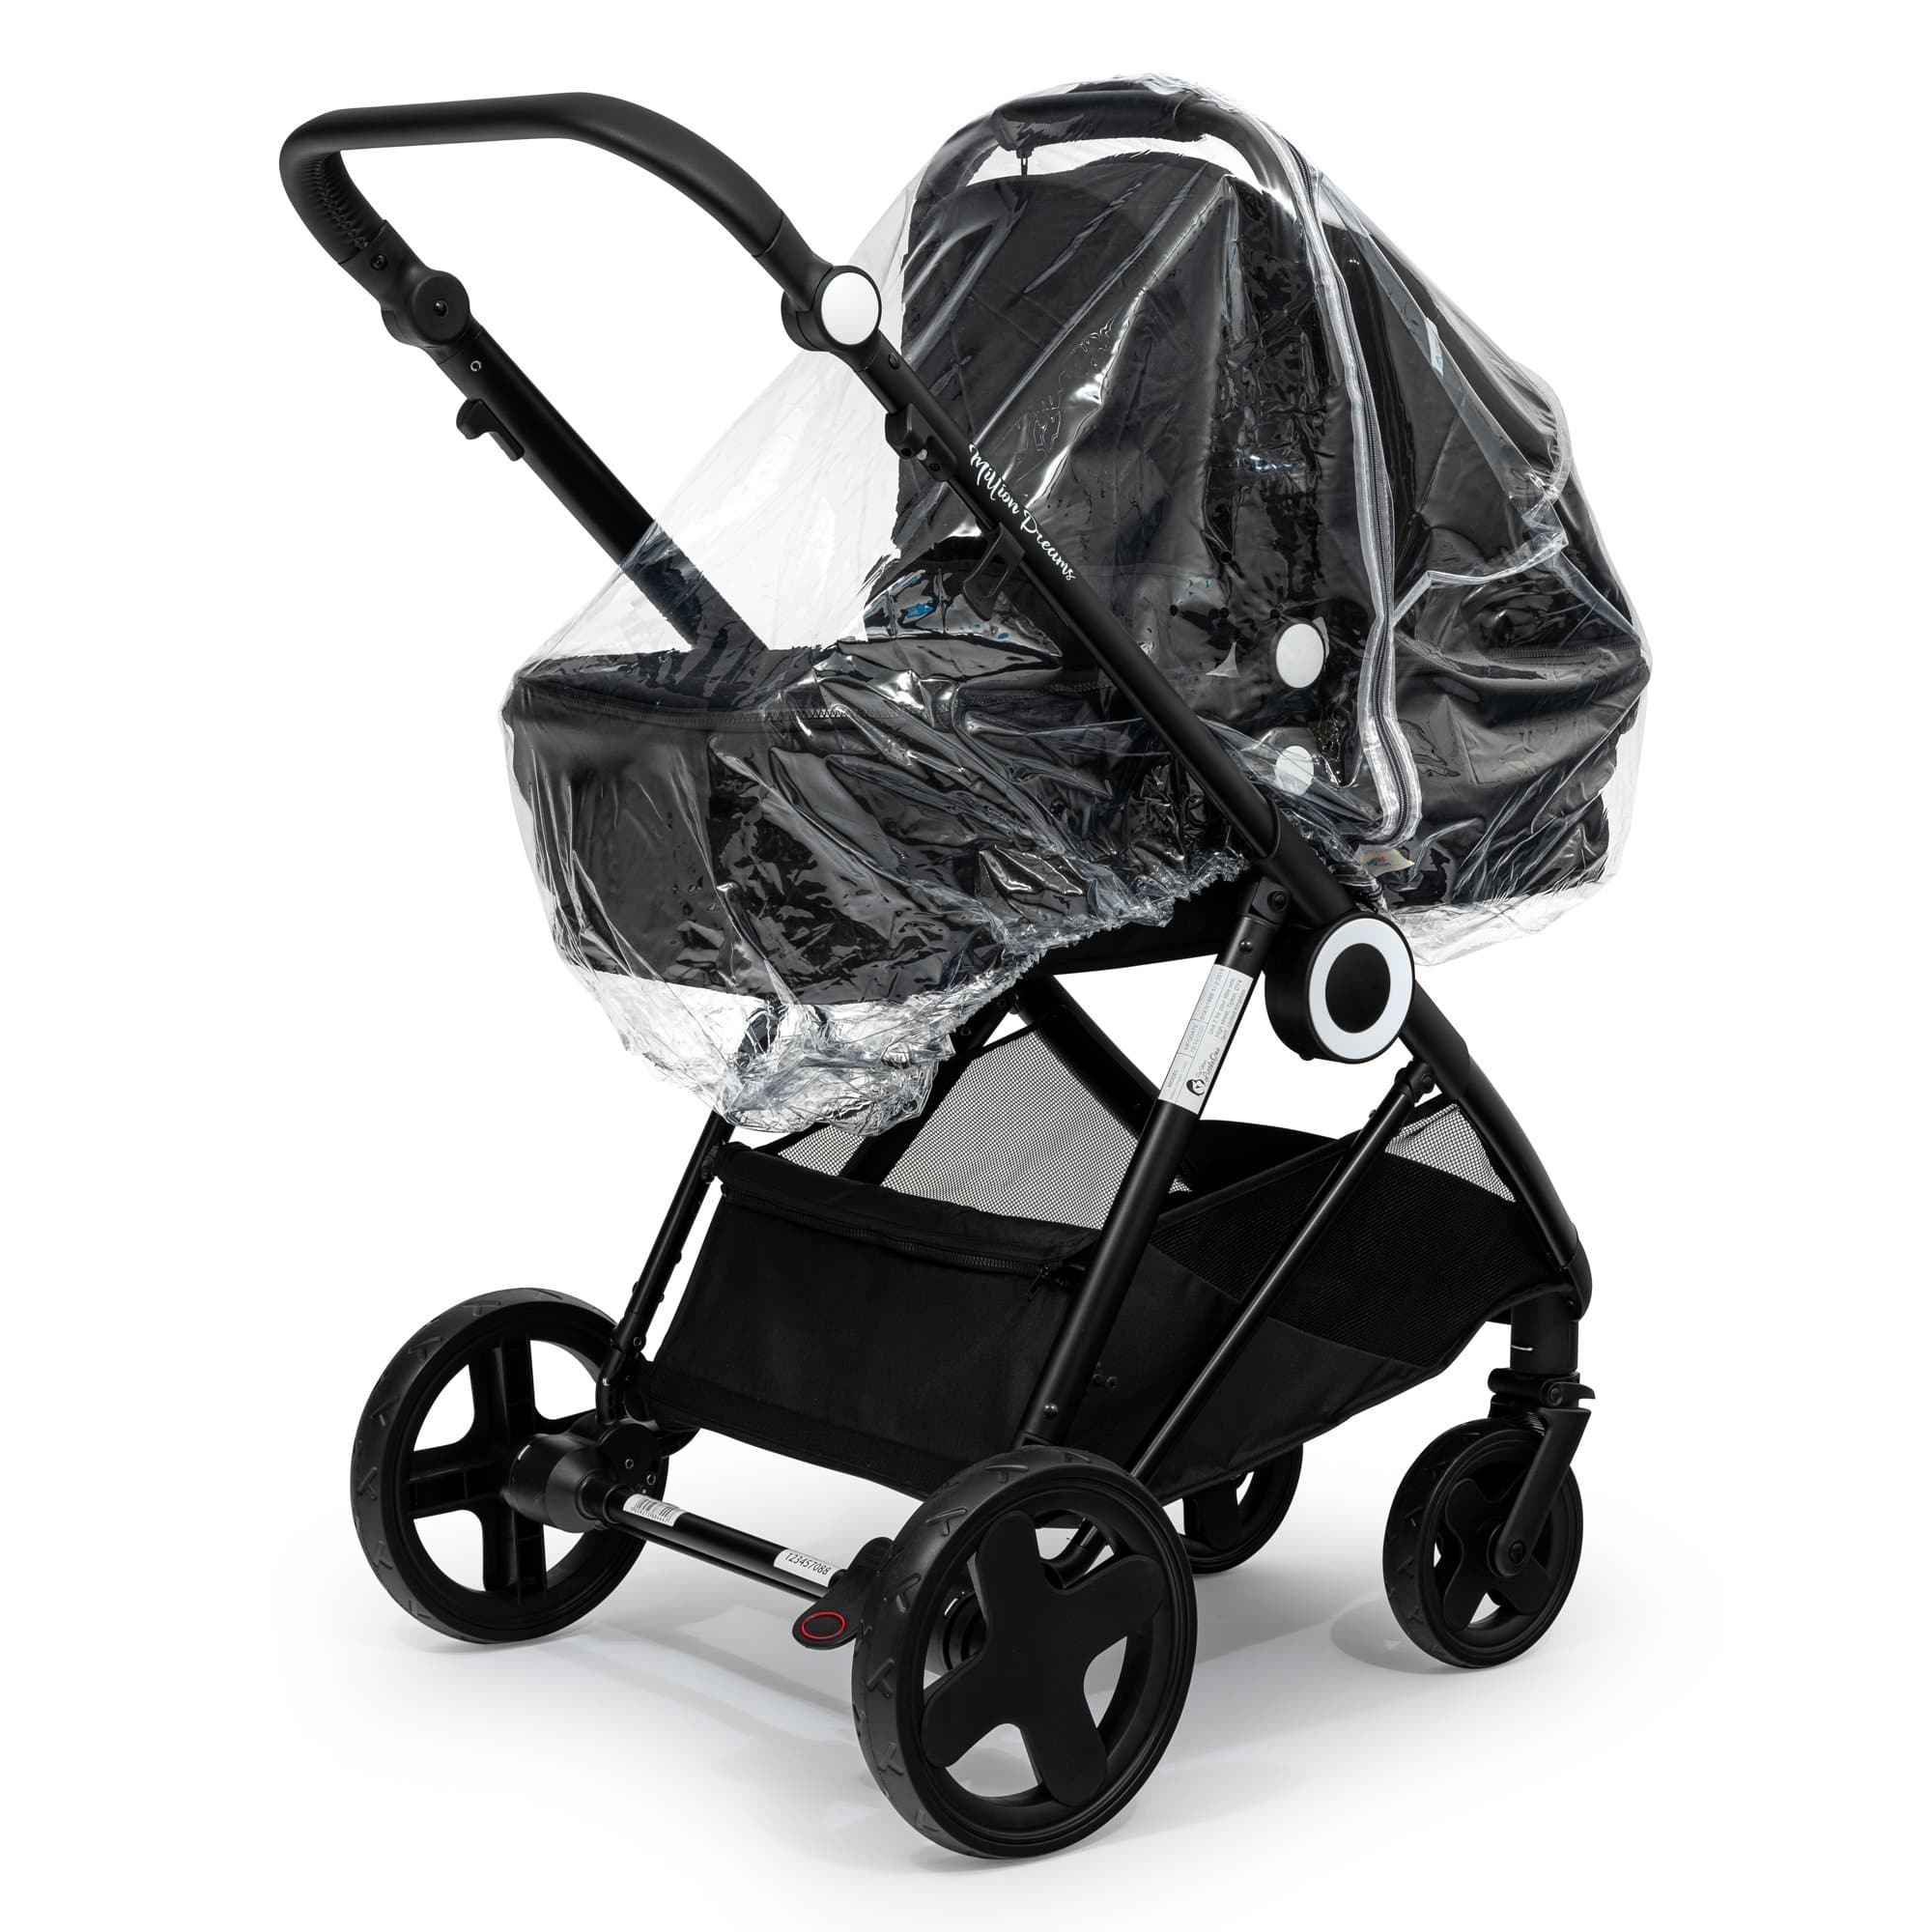 2 in 1 Rain Cover Compatible with Chicco - Fits All Models - For Your Little One